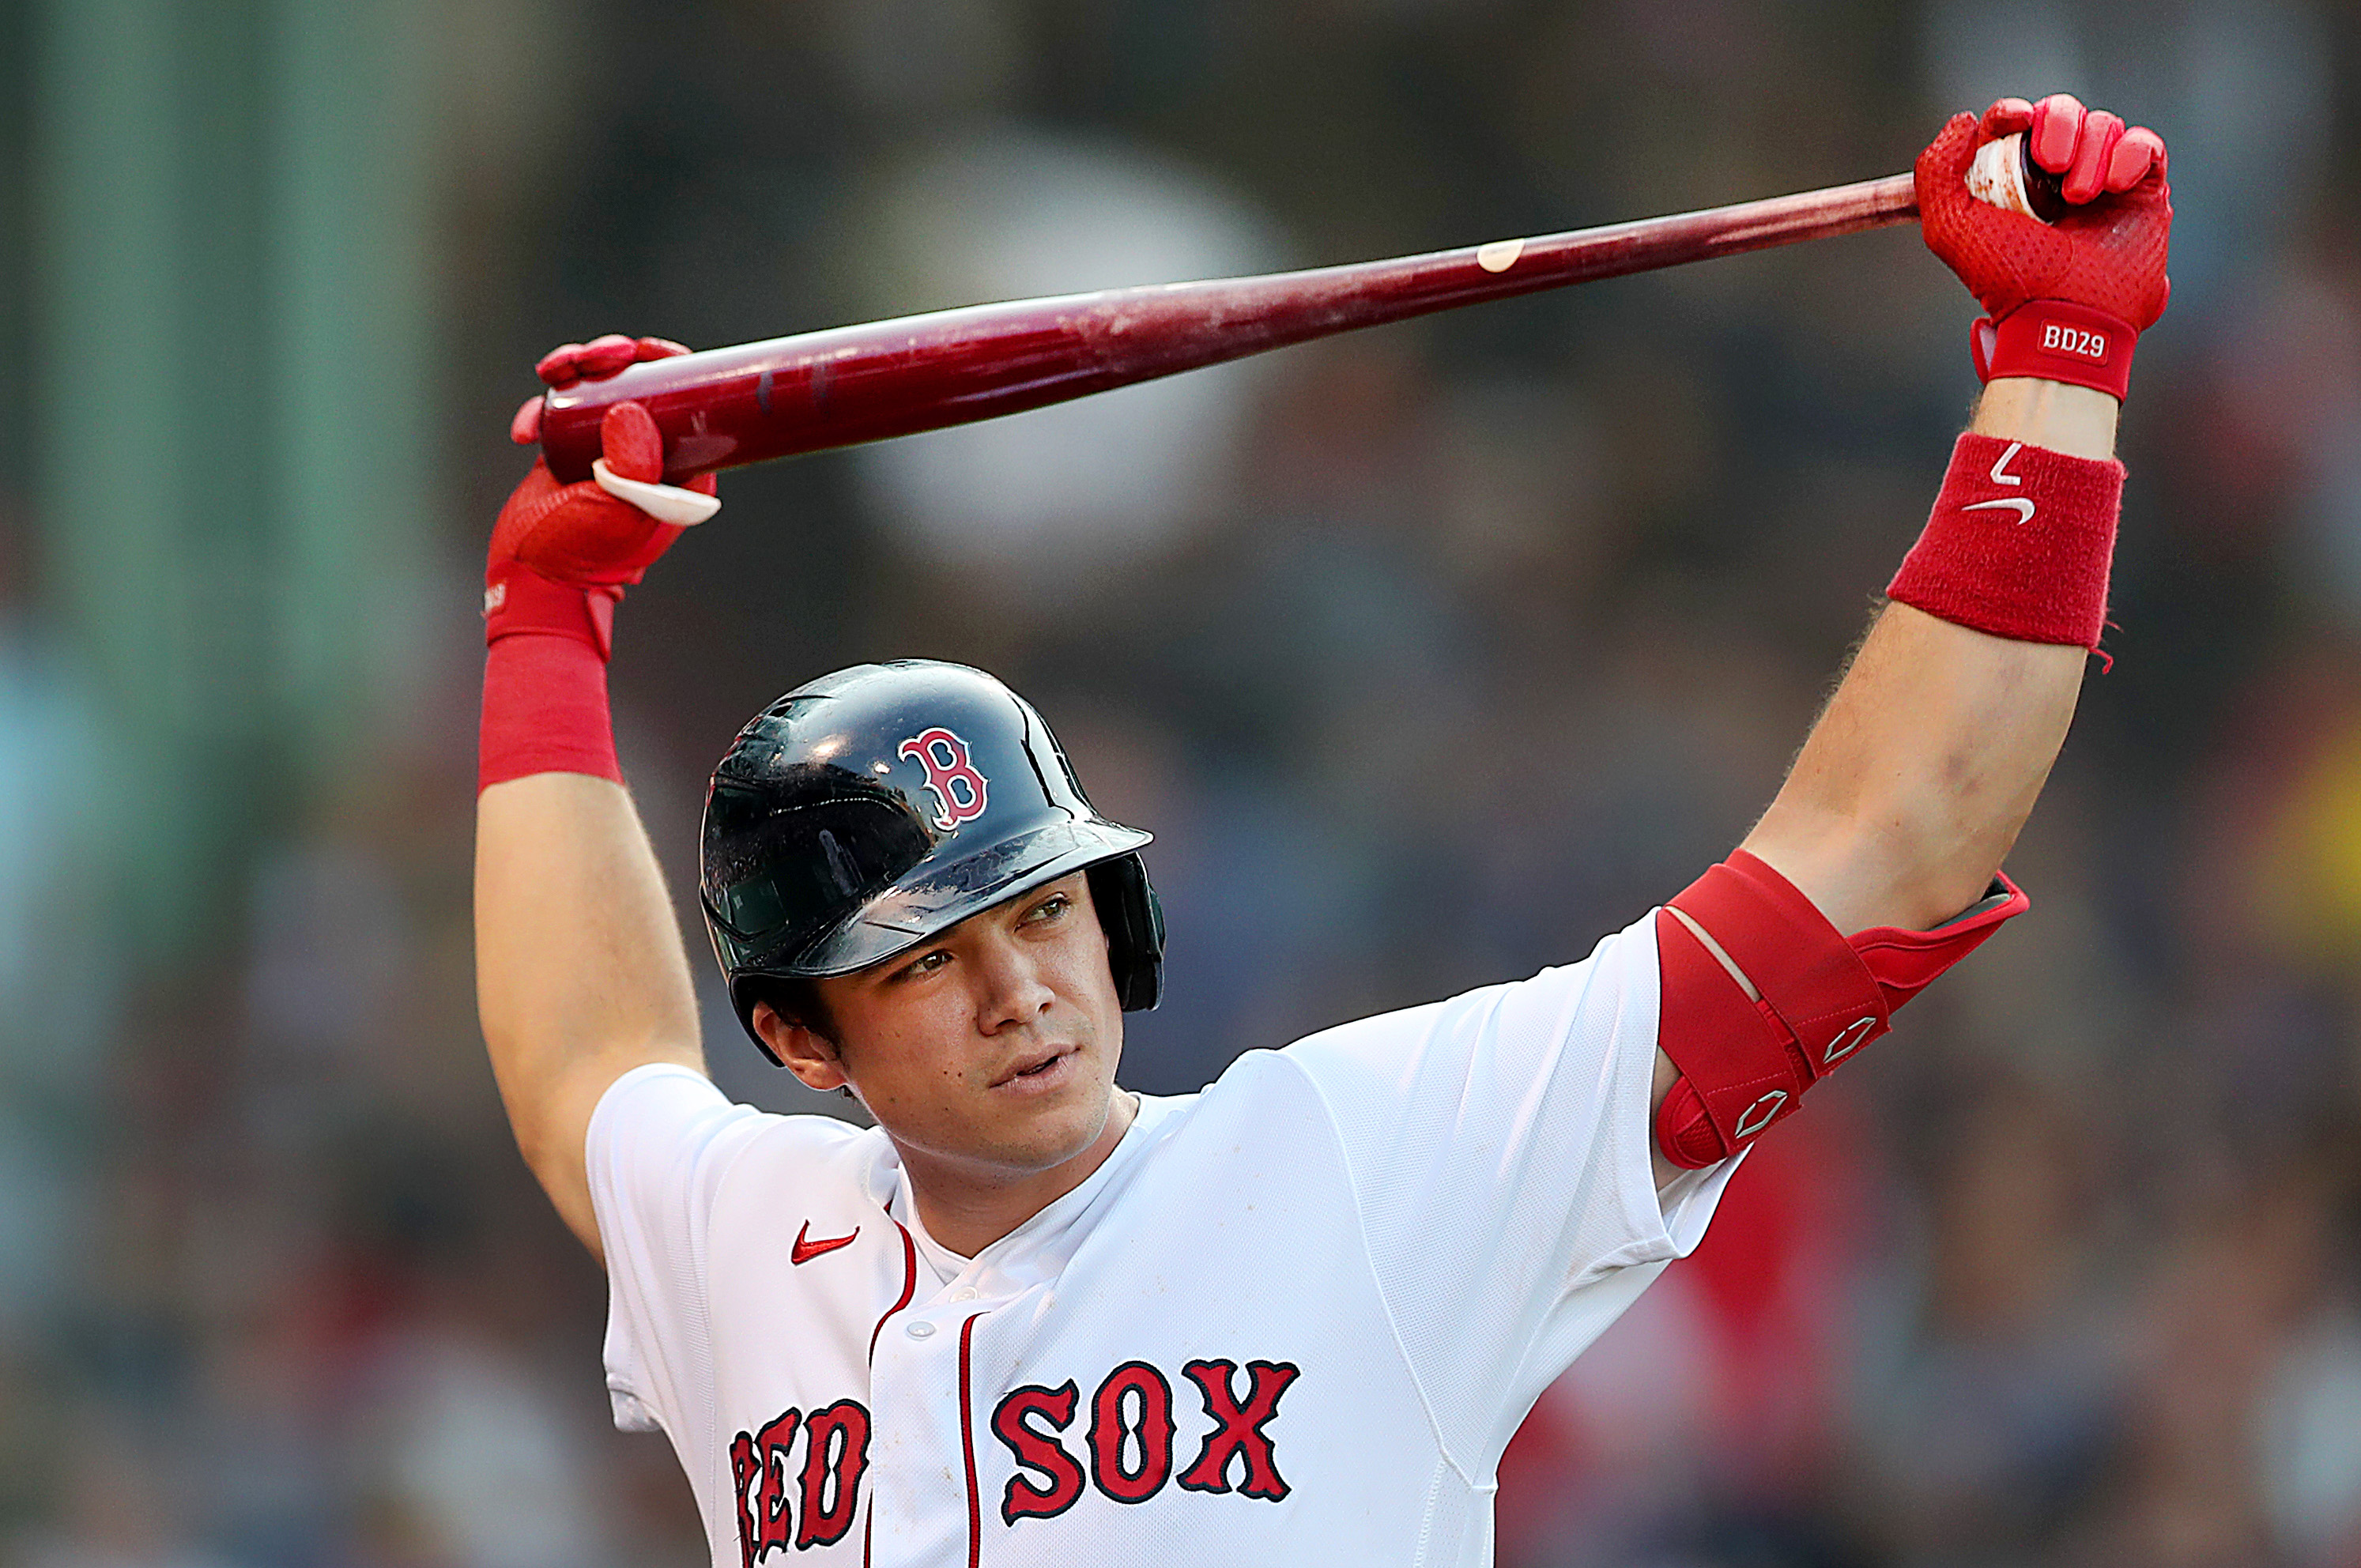 Boston Red Sox: Bobby Dalbec is finally heating up in August